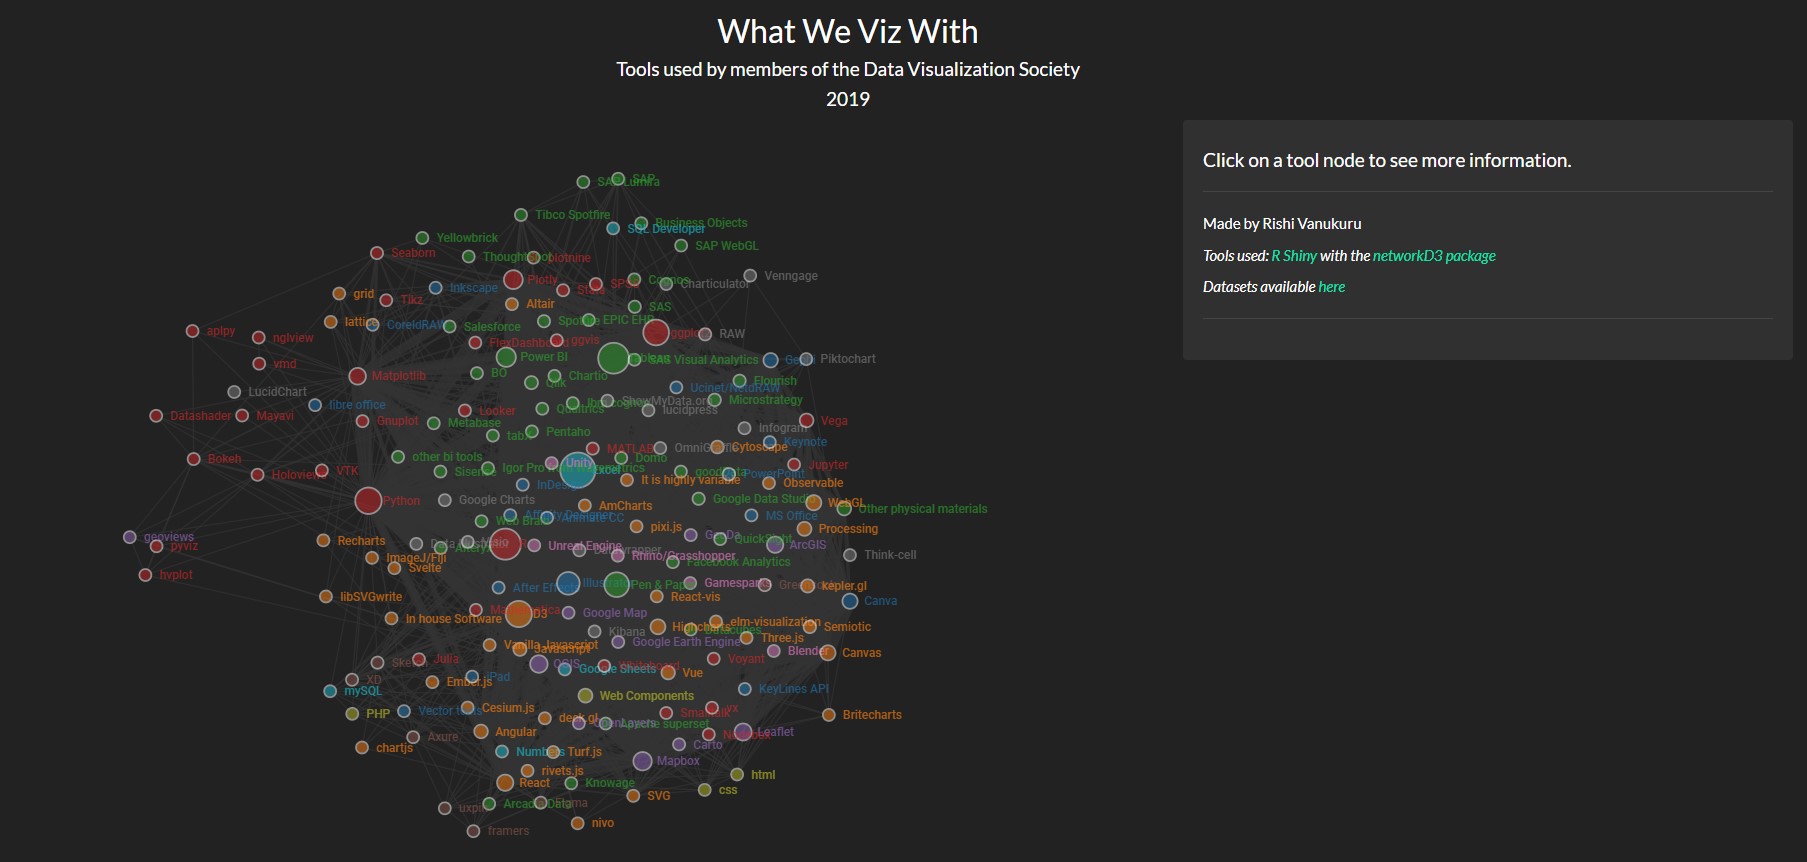 A screenshot from the What We Viz With visualisation